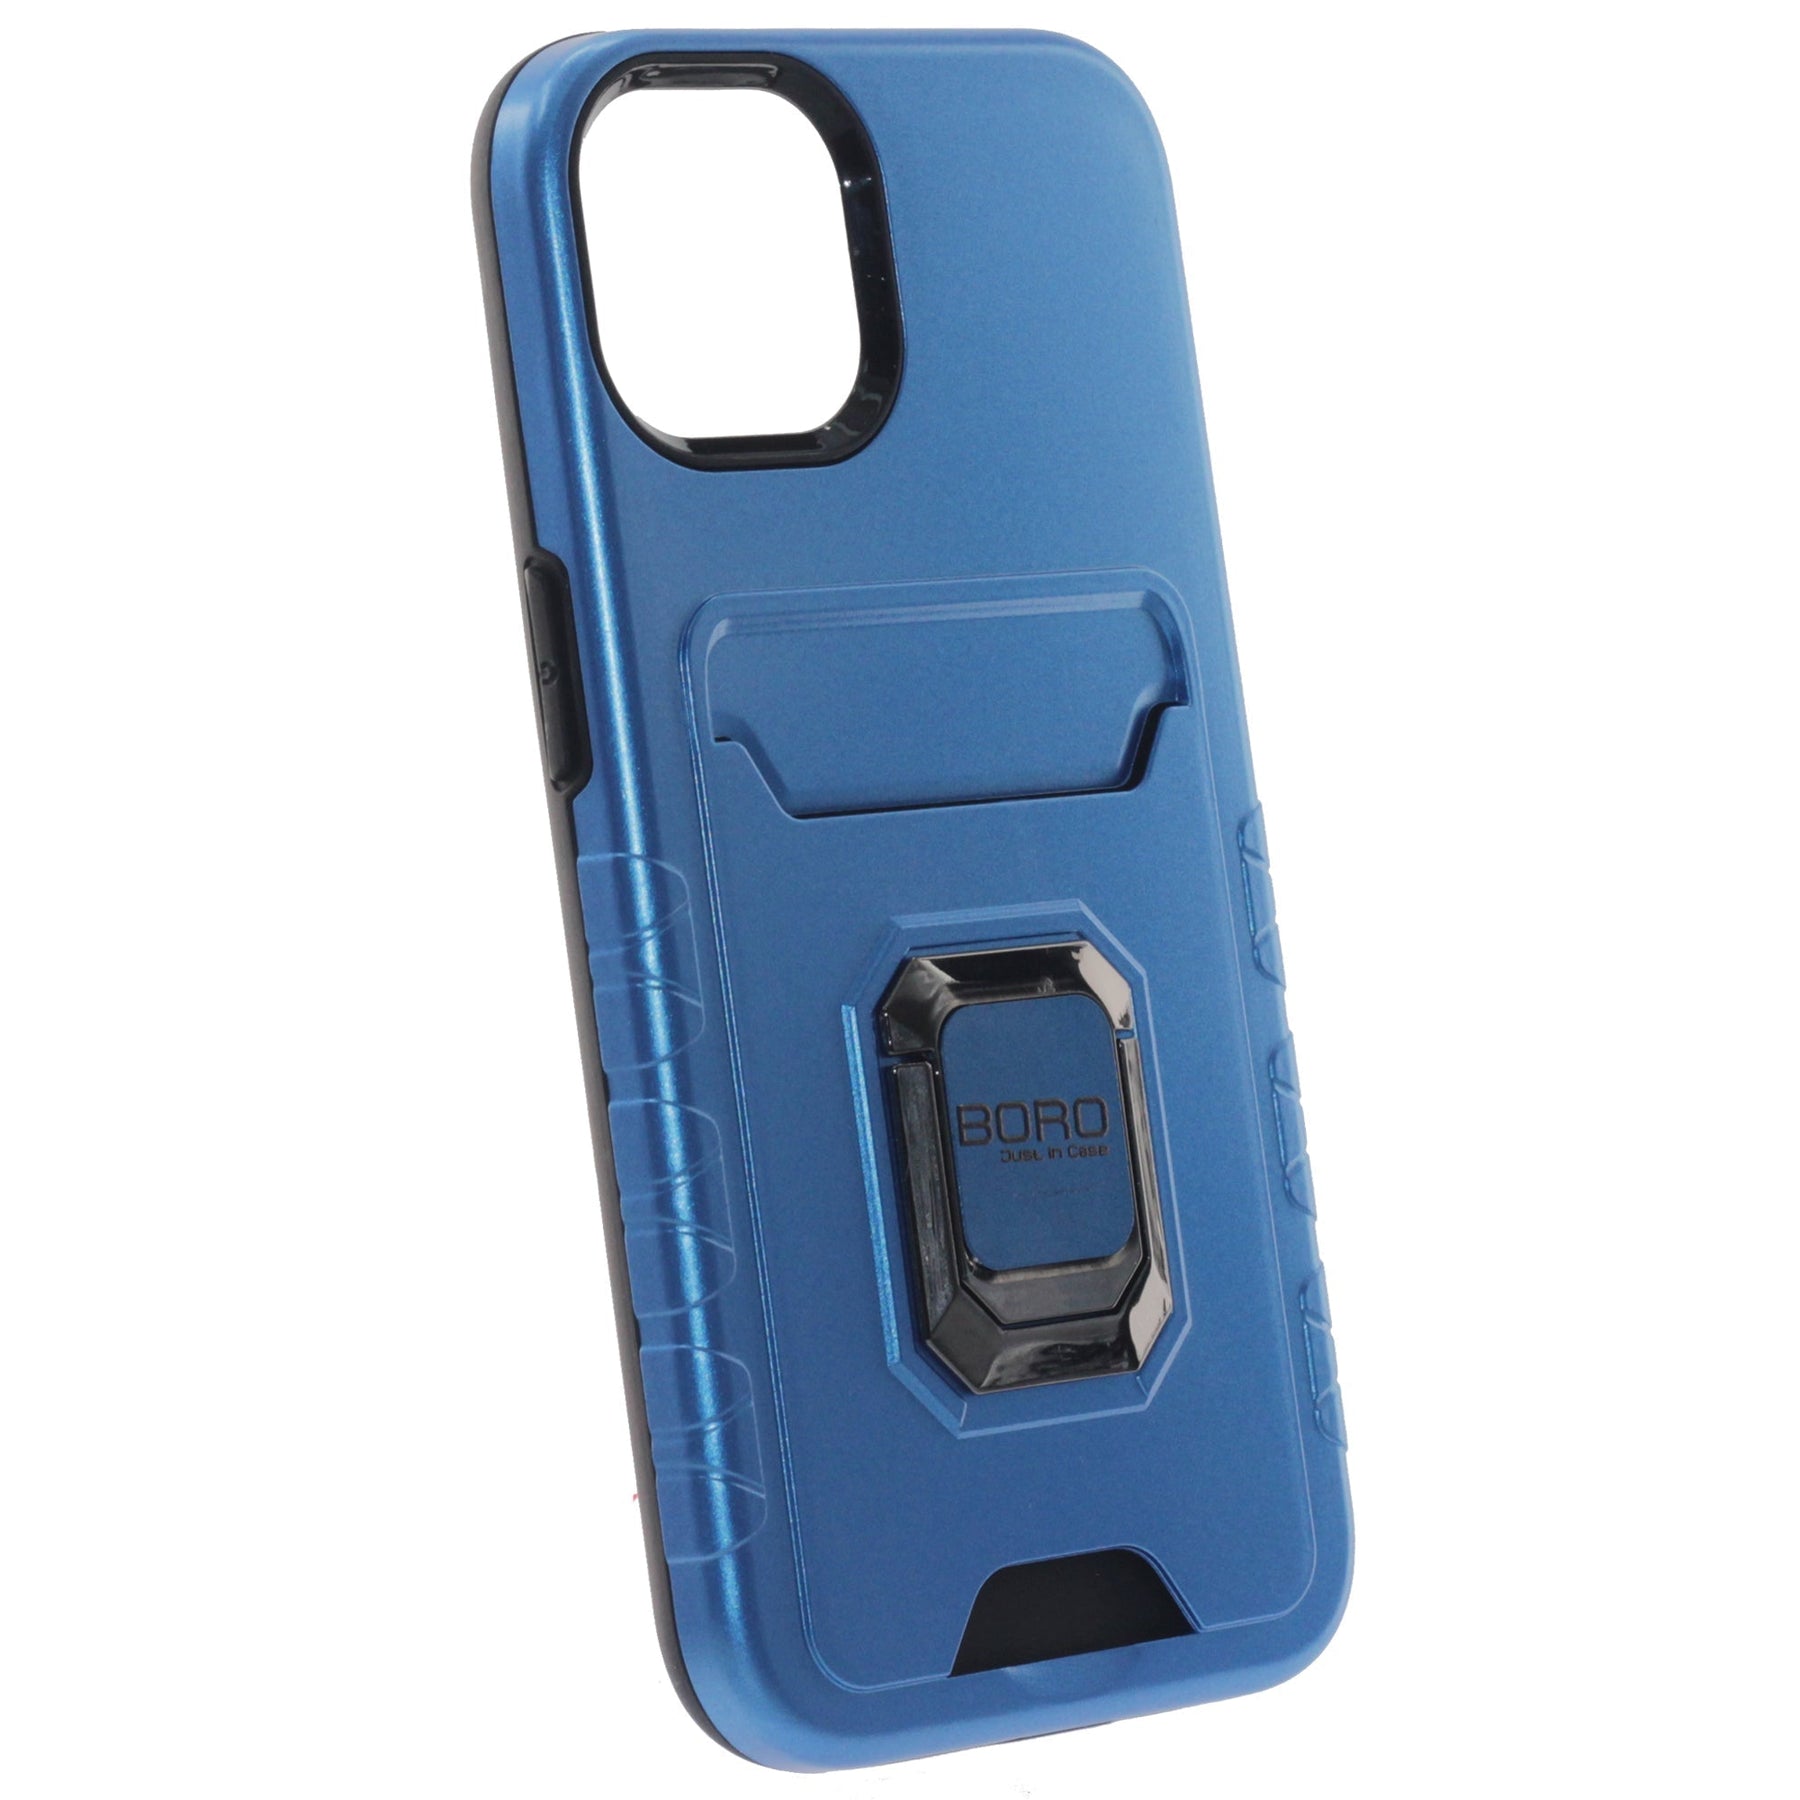 Apple iPhone 11 Pro Max, Case with Card Holder, Color Blue